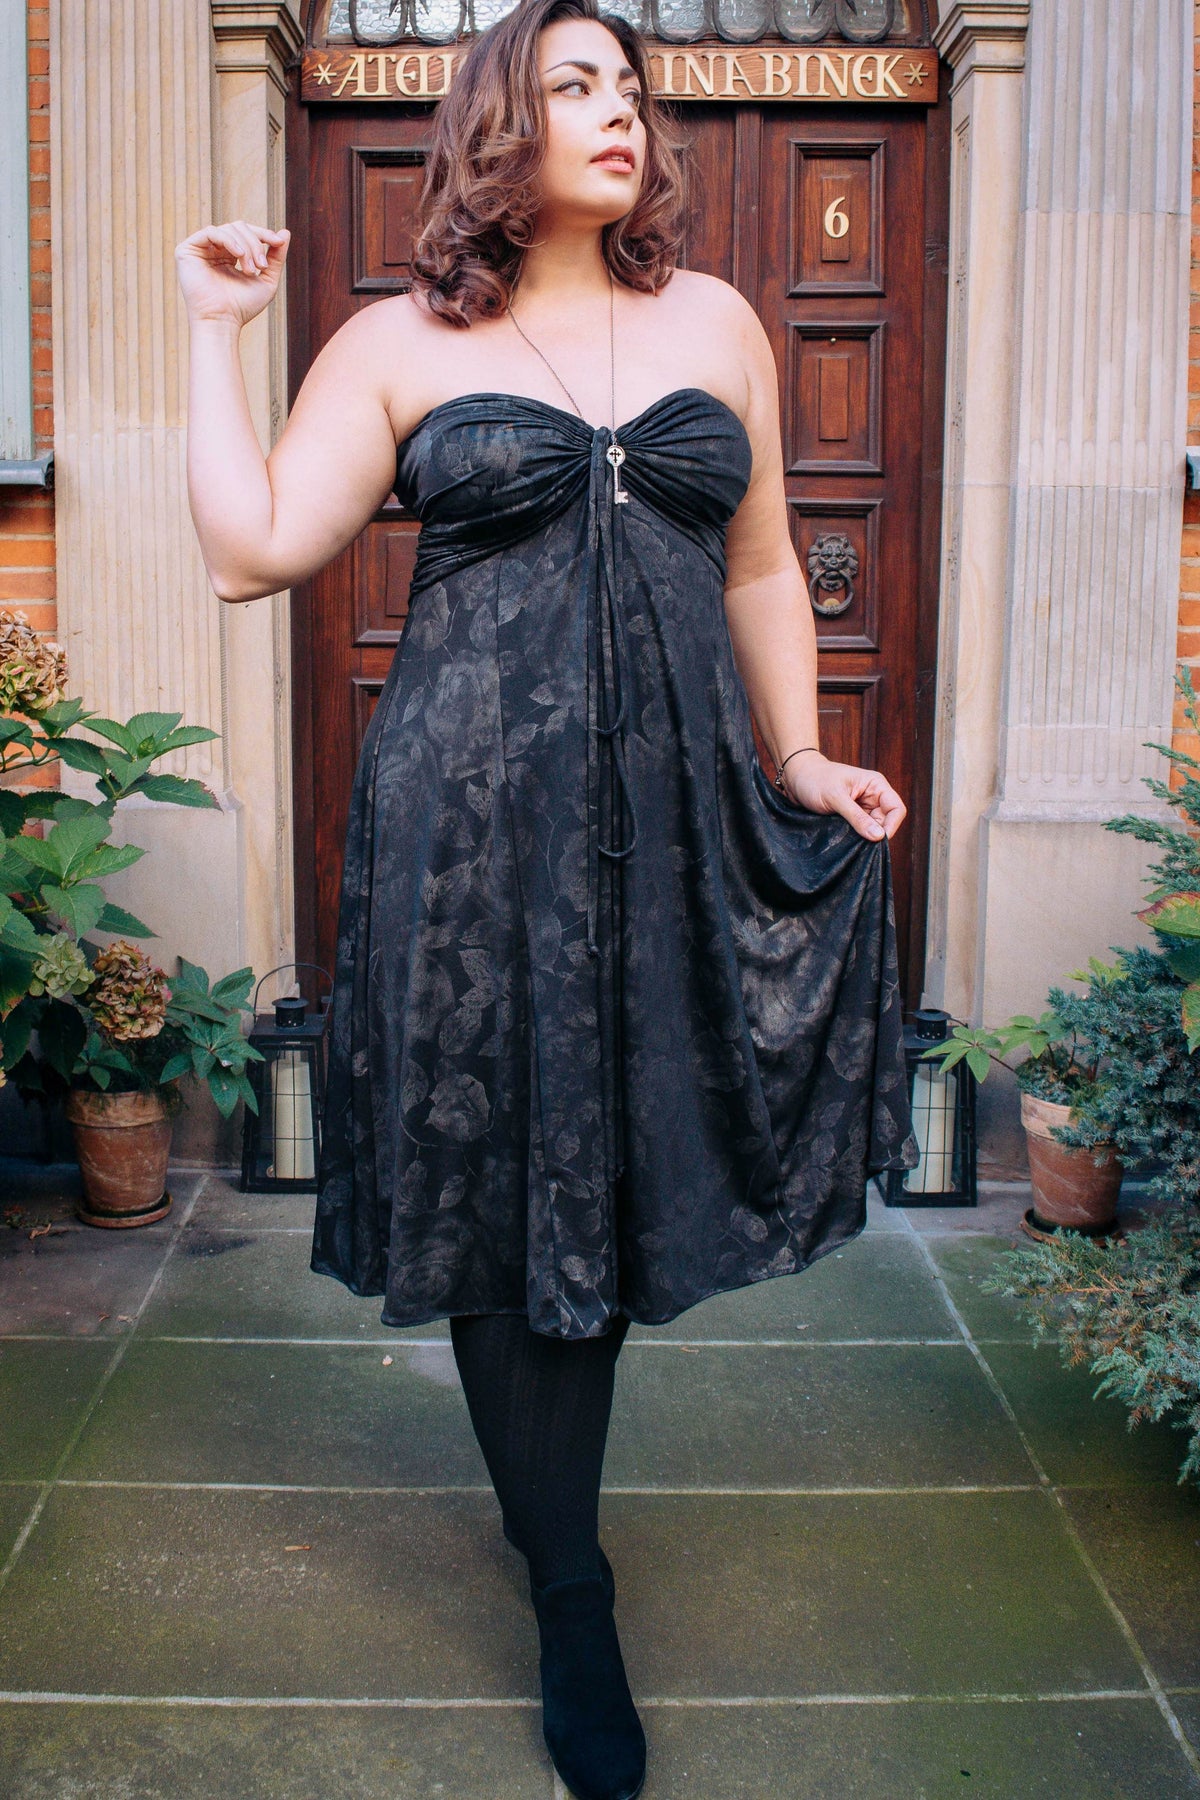 Bubble Dress in Foil Floral worn as strapless style dress